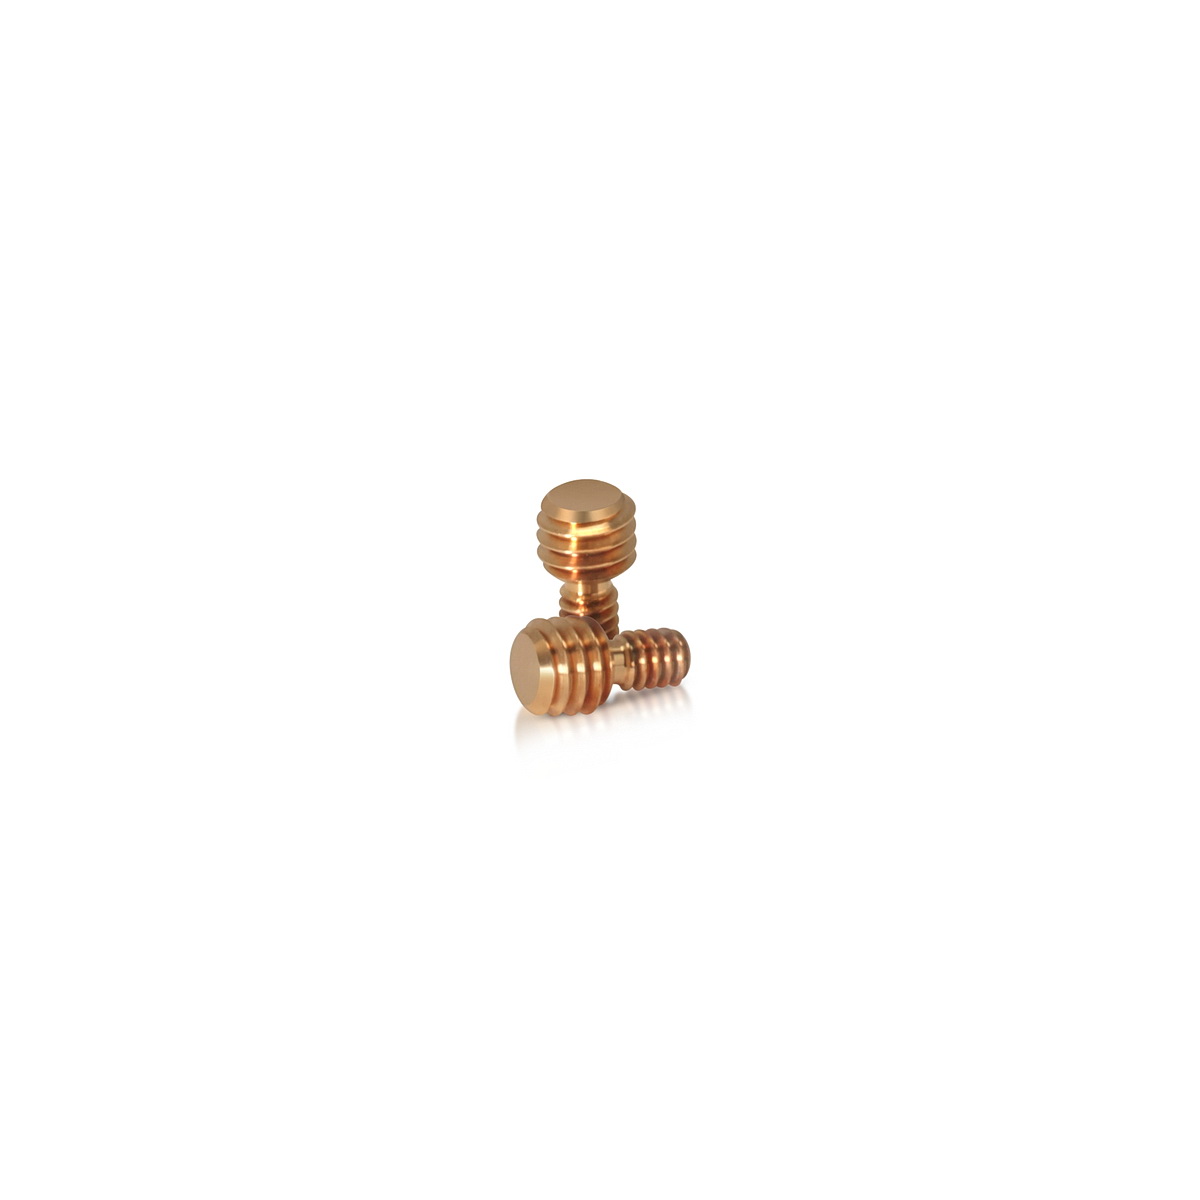 5/16-18 to 1/4-20 Conversion Set Screw, Total Length: 9/16''